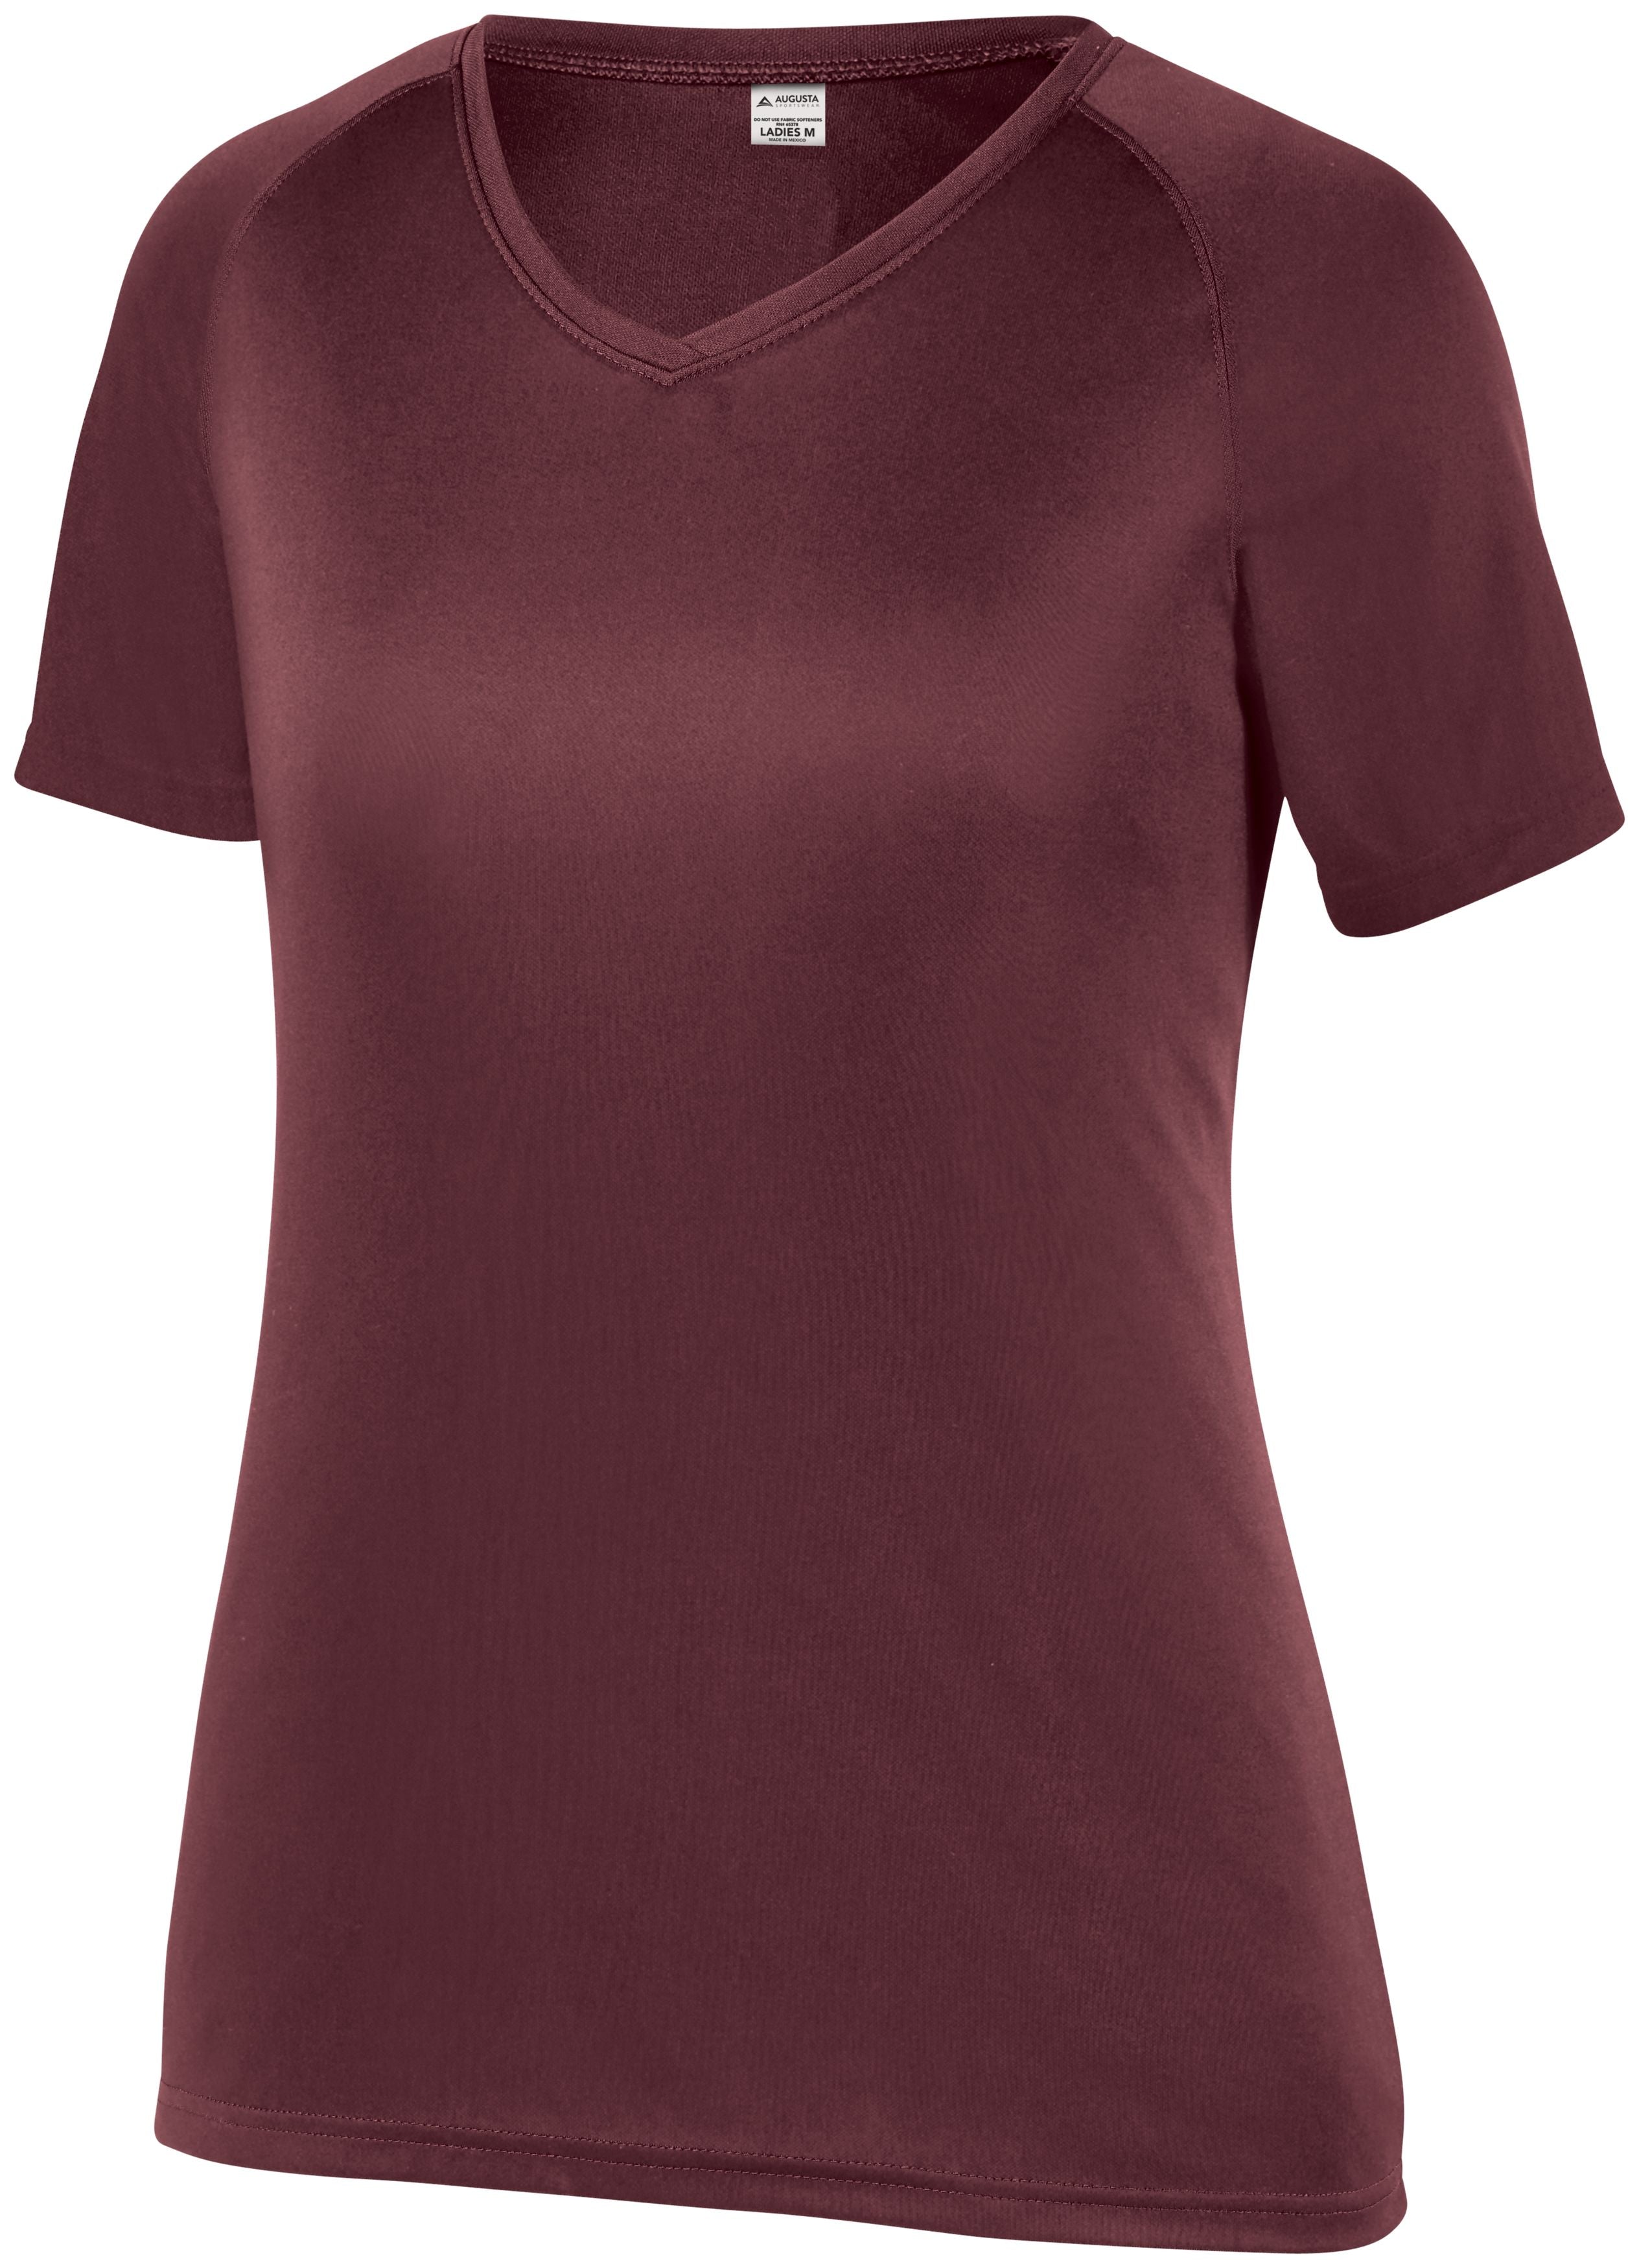 Augusta Sportswear Girls Attain Wicking Raglan Sleeve Tee in Maroon (Hlw)  -Part of the Girls, T-Shirts, Augusta-Products, Girls-Tee-Shirt, Shirts product lines at KanaleyCreations.com